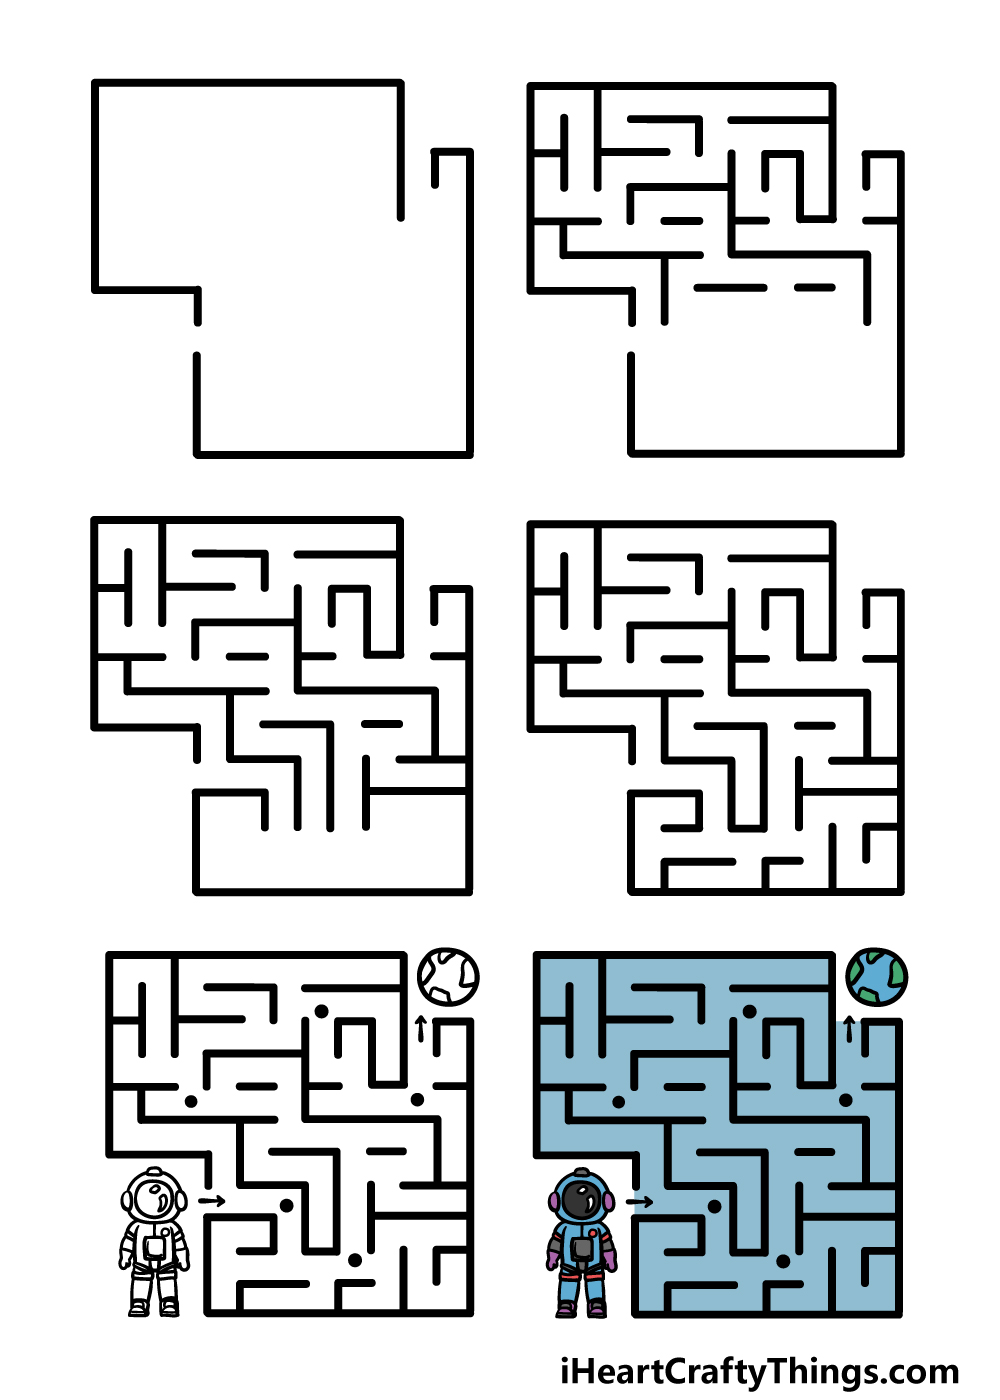 how to draw a maze in 6 steps